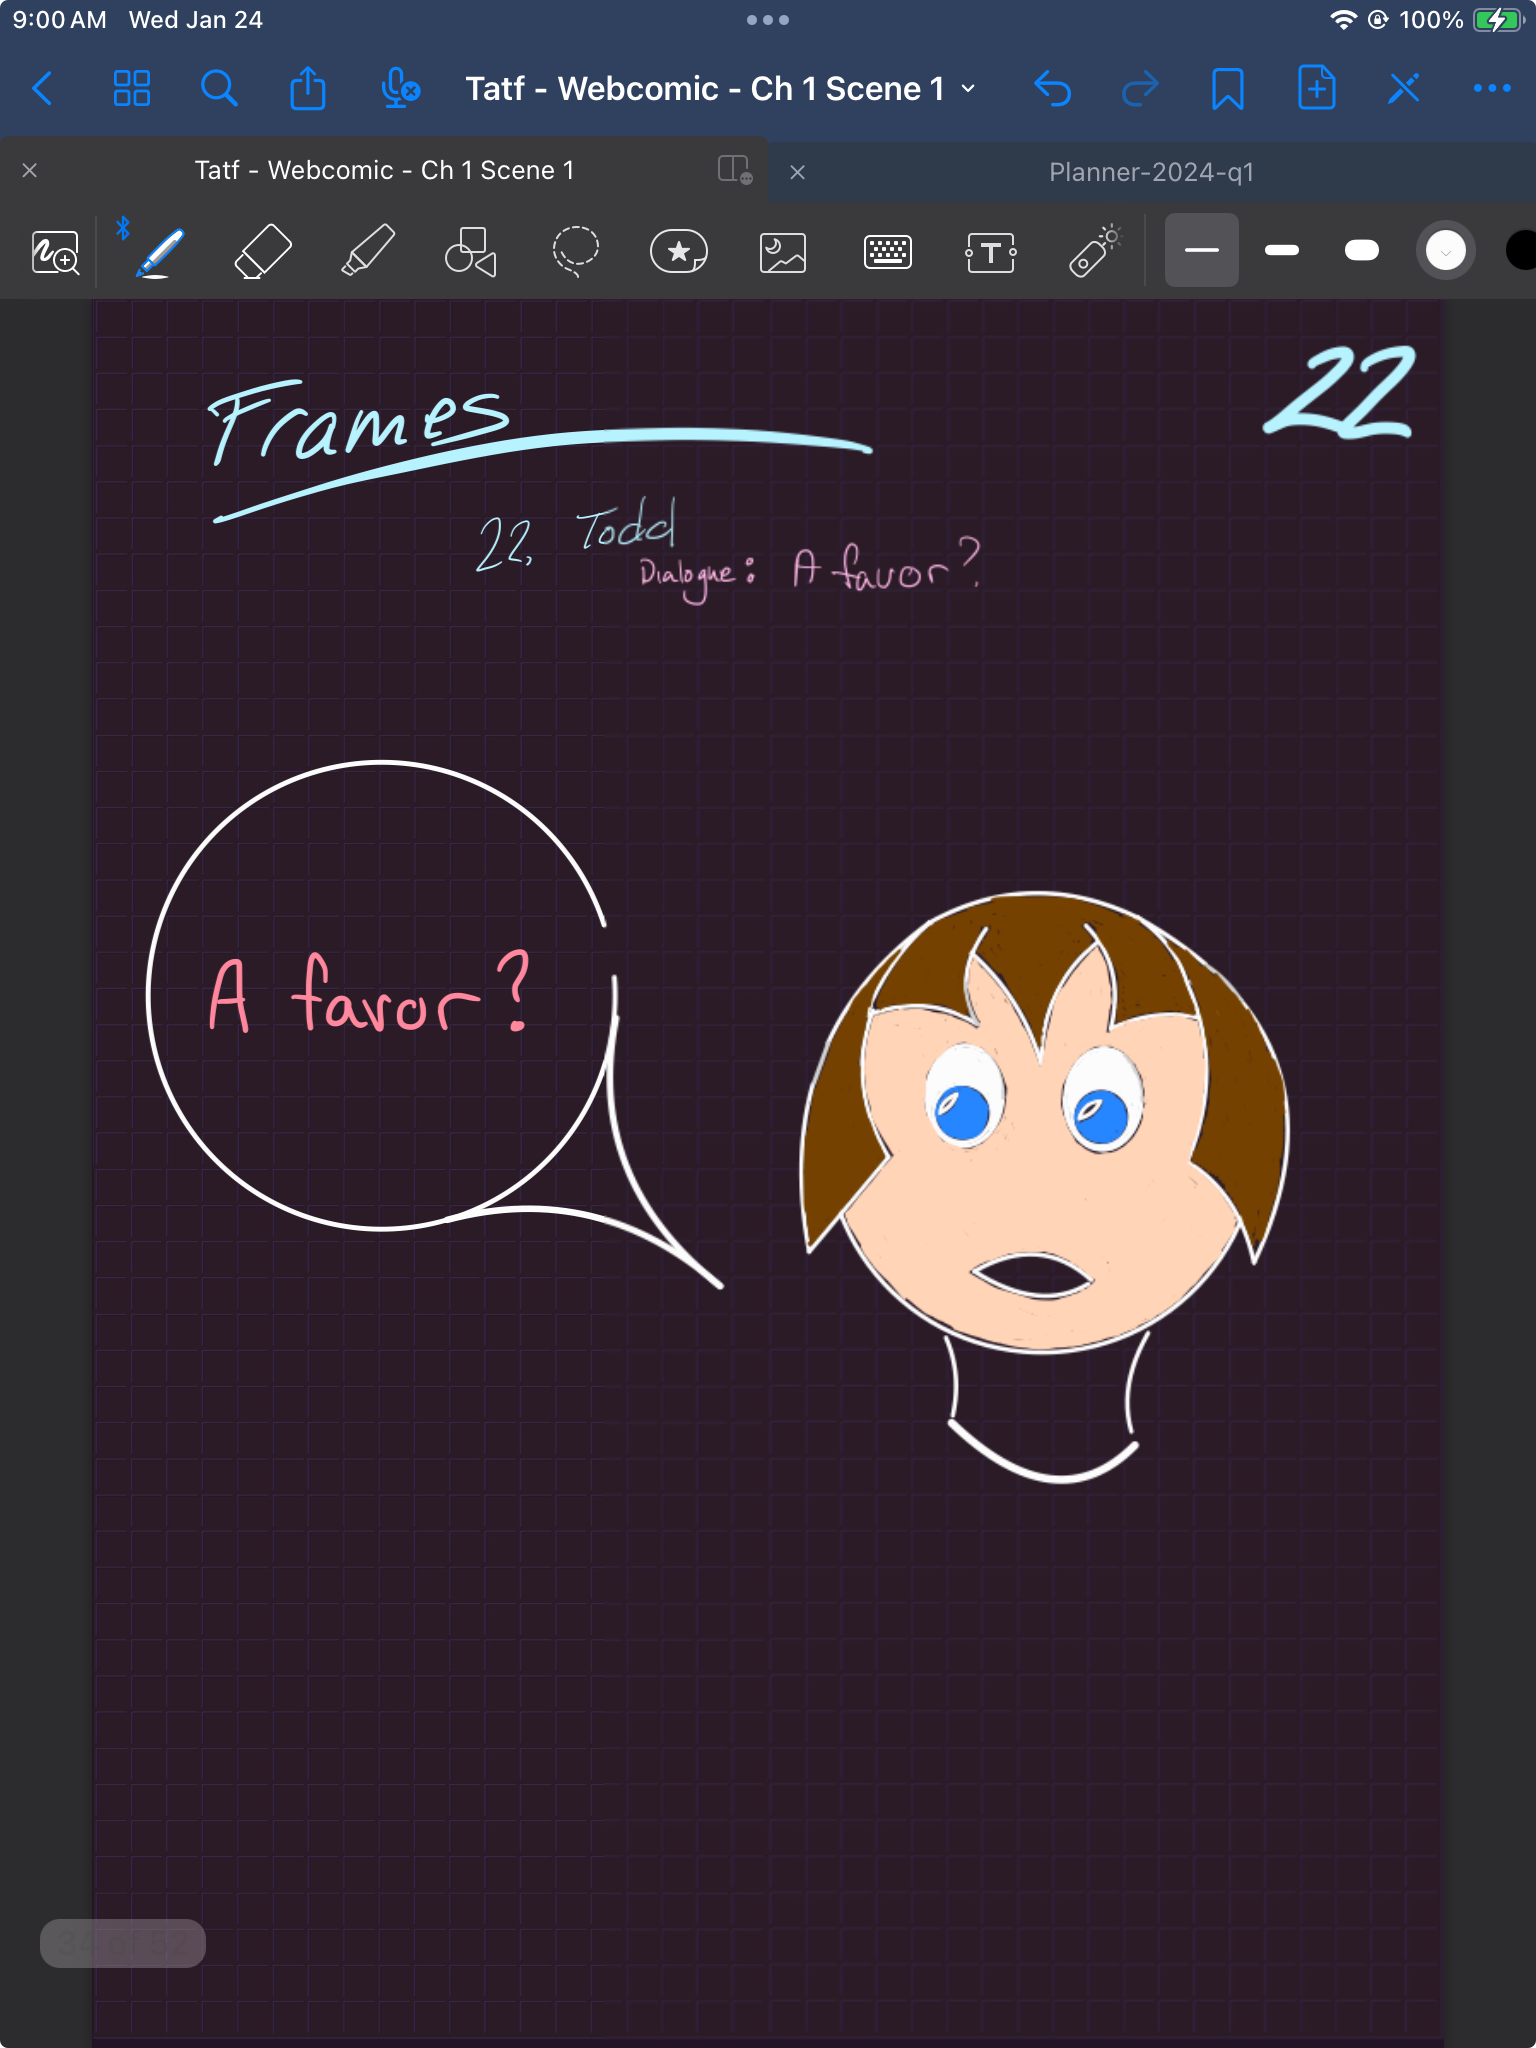 Project: Todd and the Fae WebComic : Frame 22